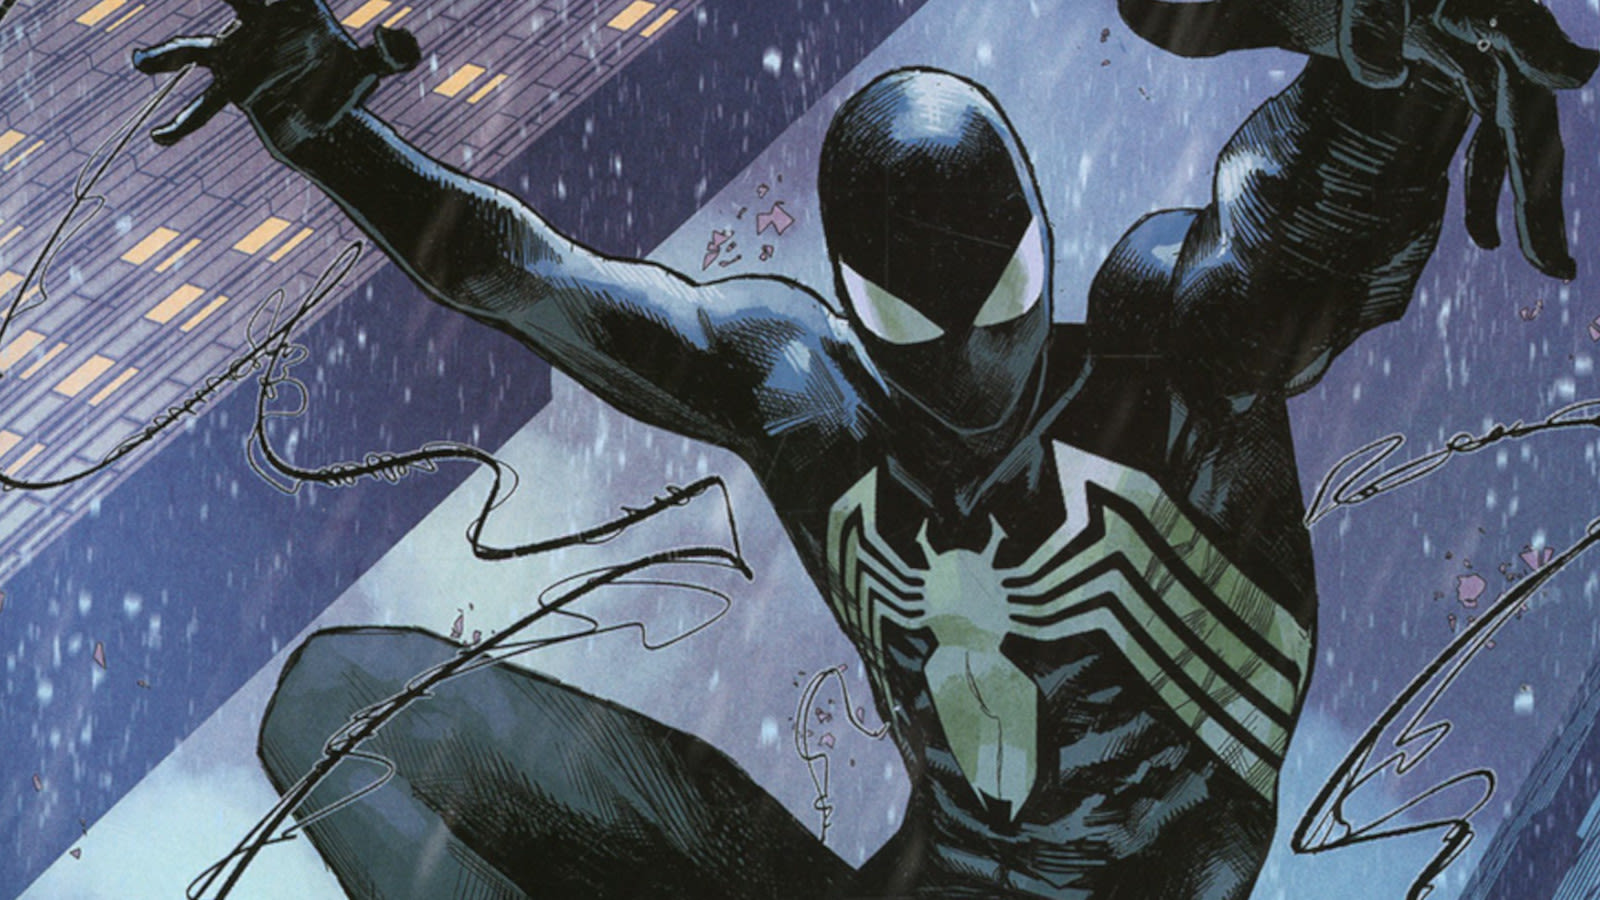 Ultimate Spider-Man confirms long-awaited original Spidey villain debuts in May - Dexerto